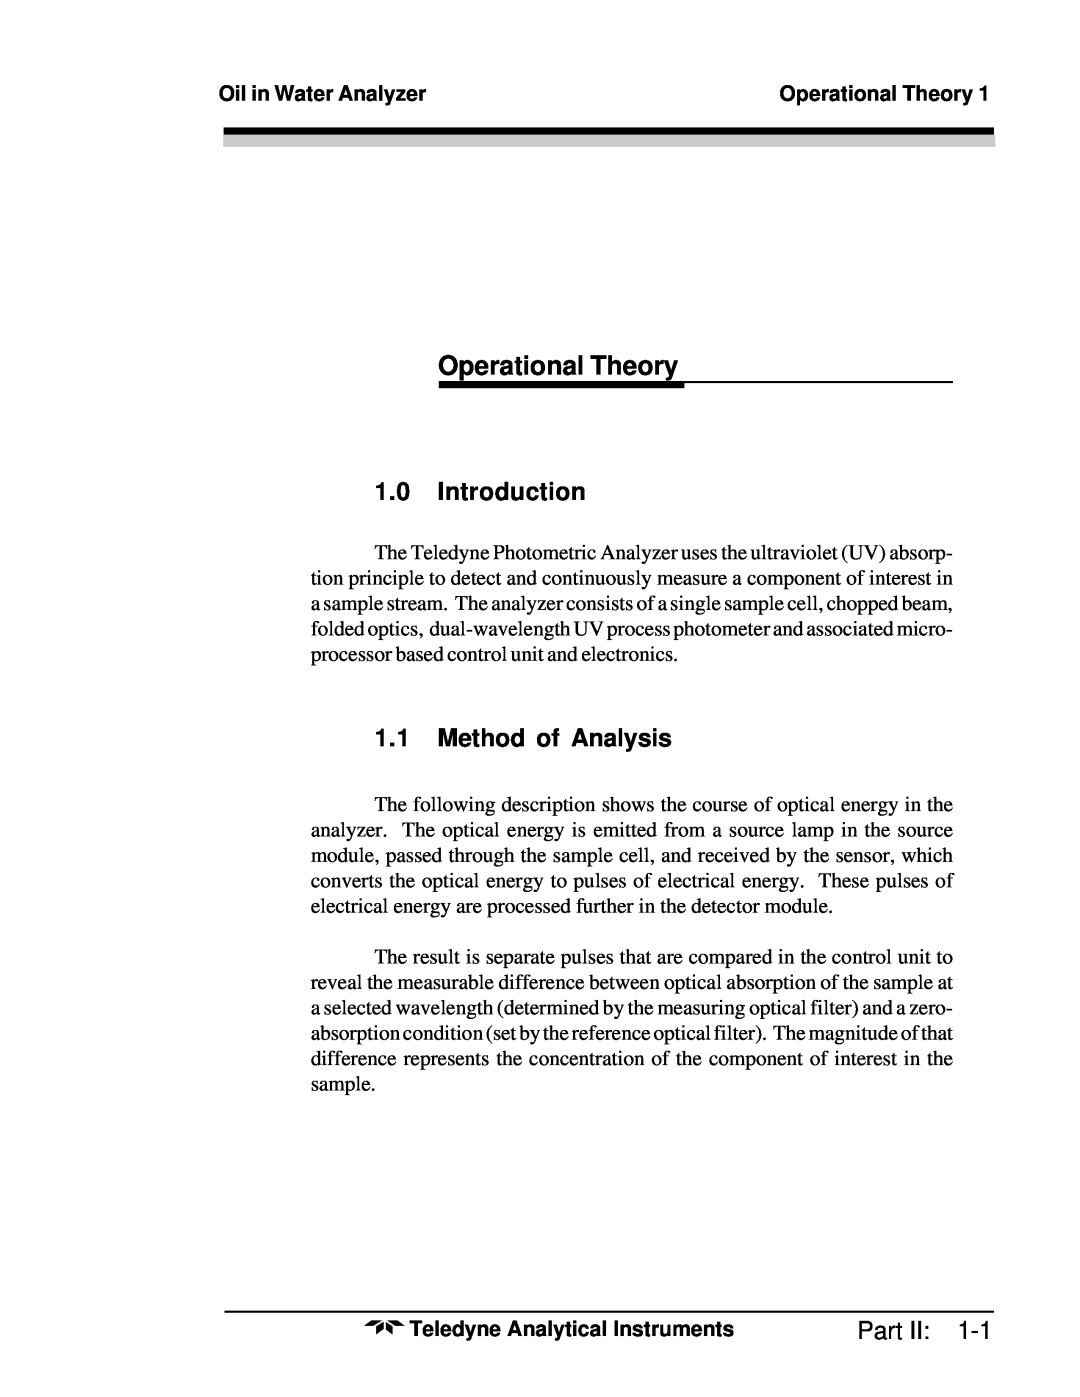 Teledyne 6600 manual Operational Theory, 1.0Introduction, 1.1Method of Analysis, Part II, Oil in Water Analyzer 